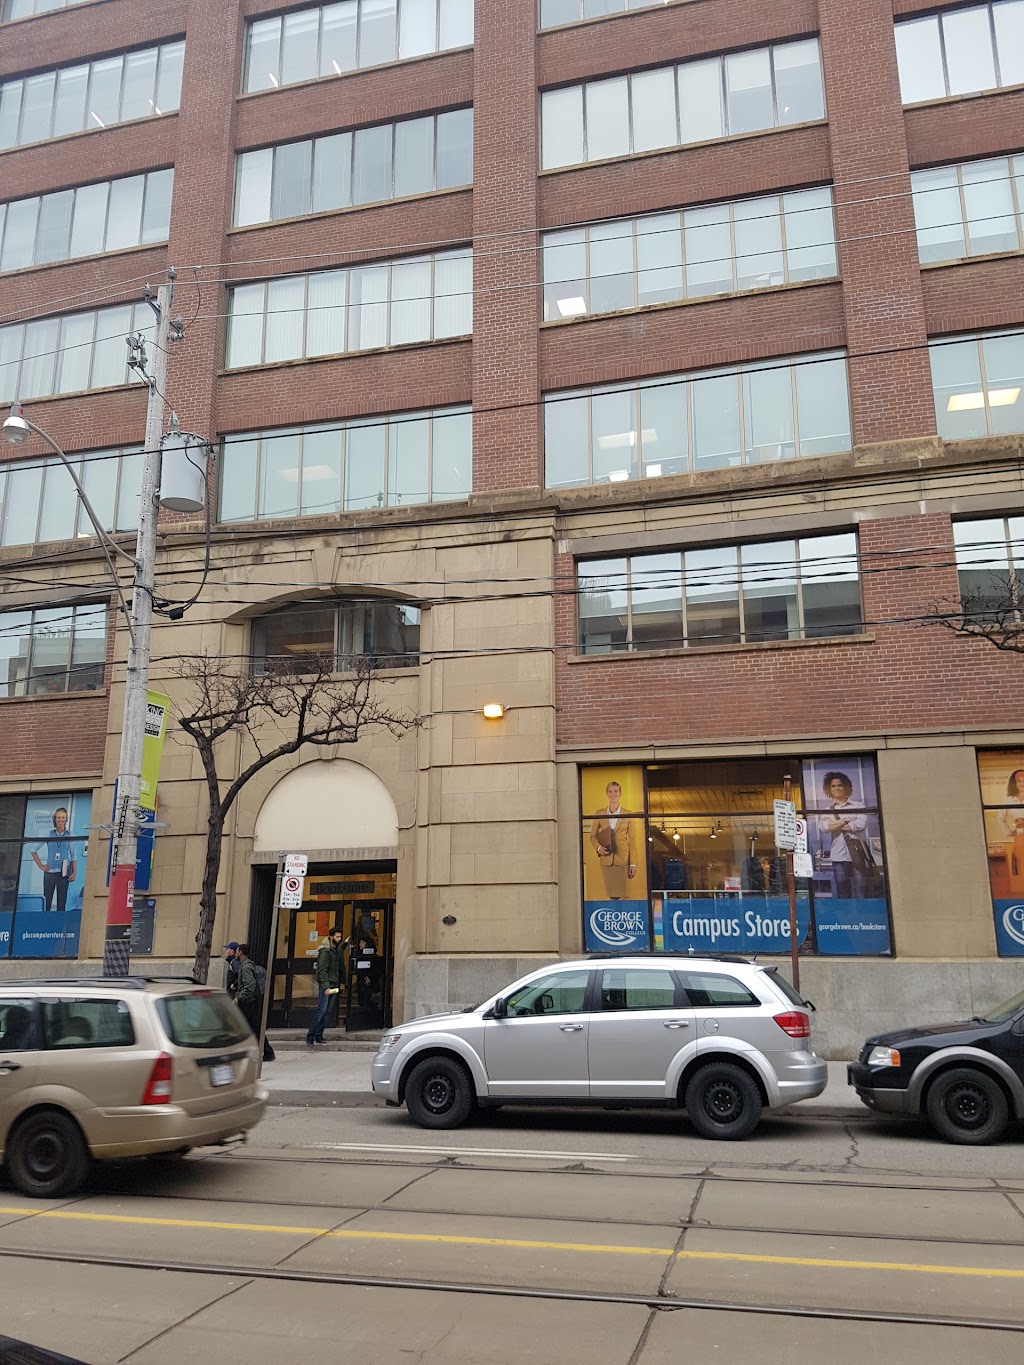 George Brown College Computer Store | electronics store | 200 King St E, Toronto, ON M5A 3W8, Canada | 4164155000 OR +1 416-415-5000